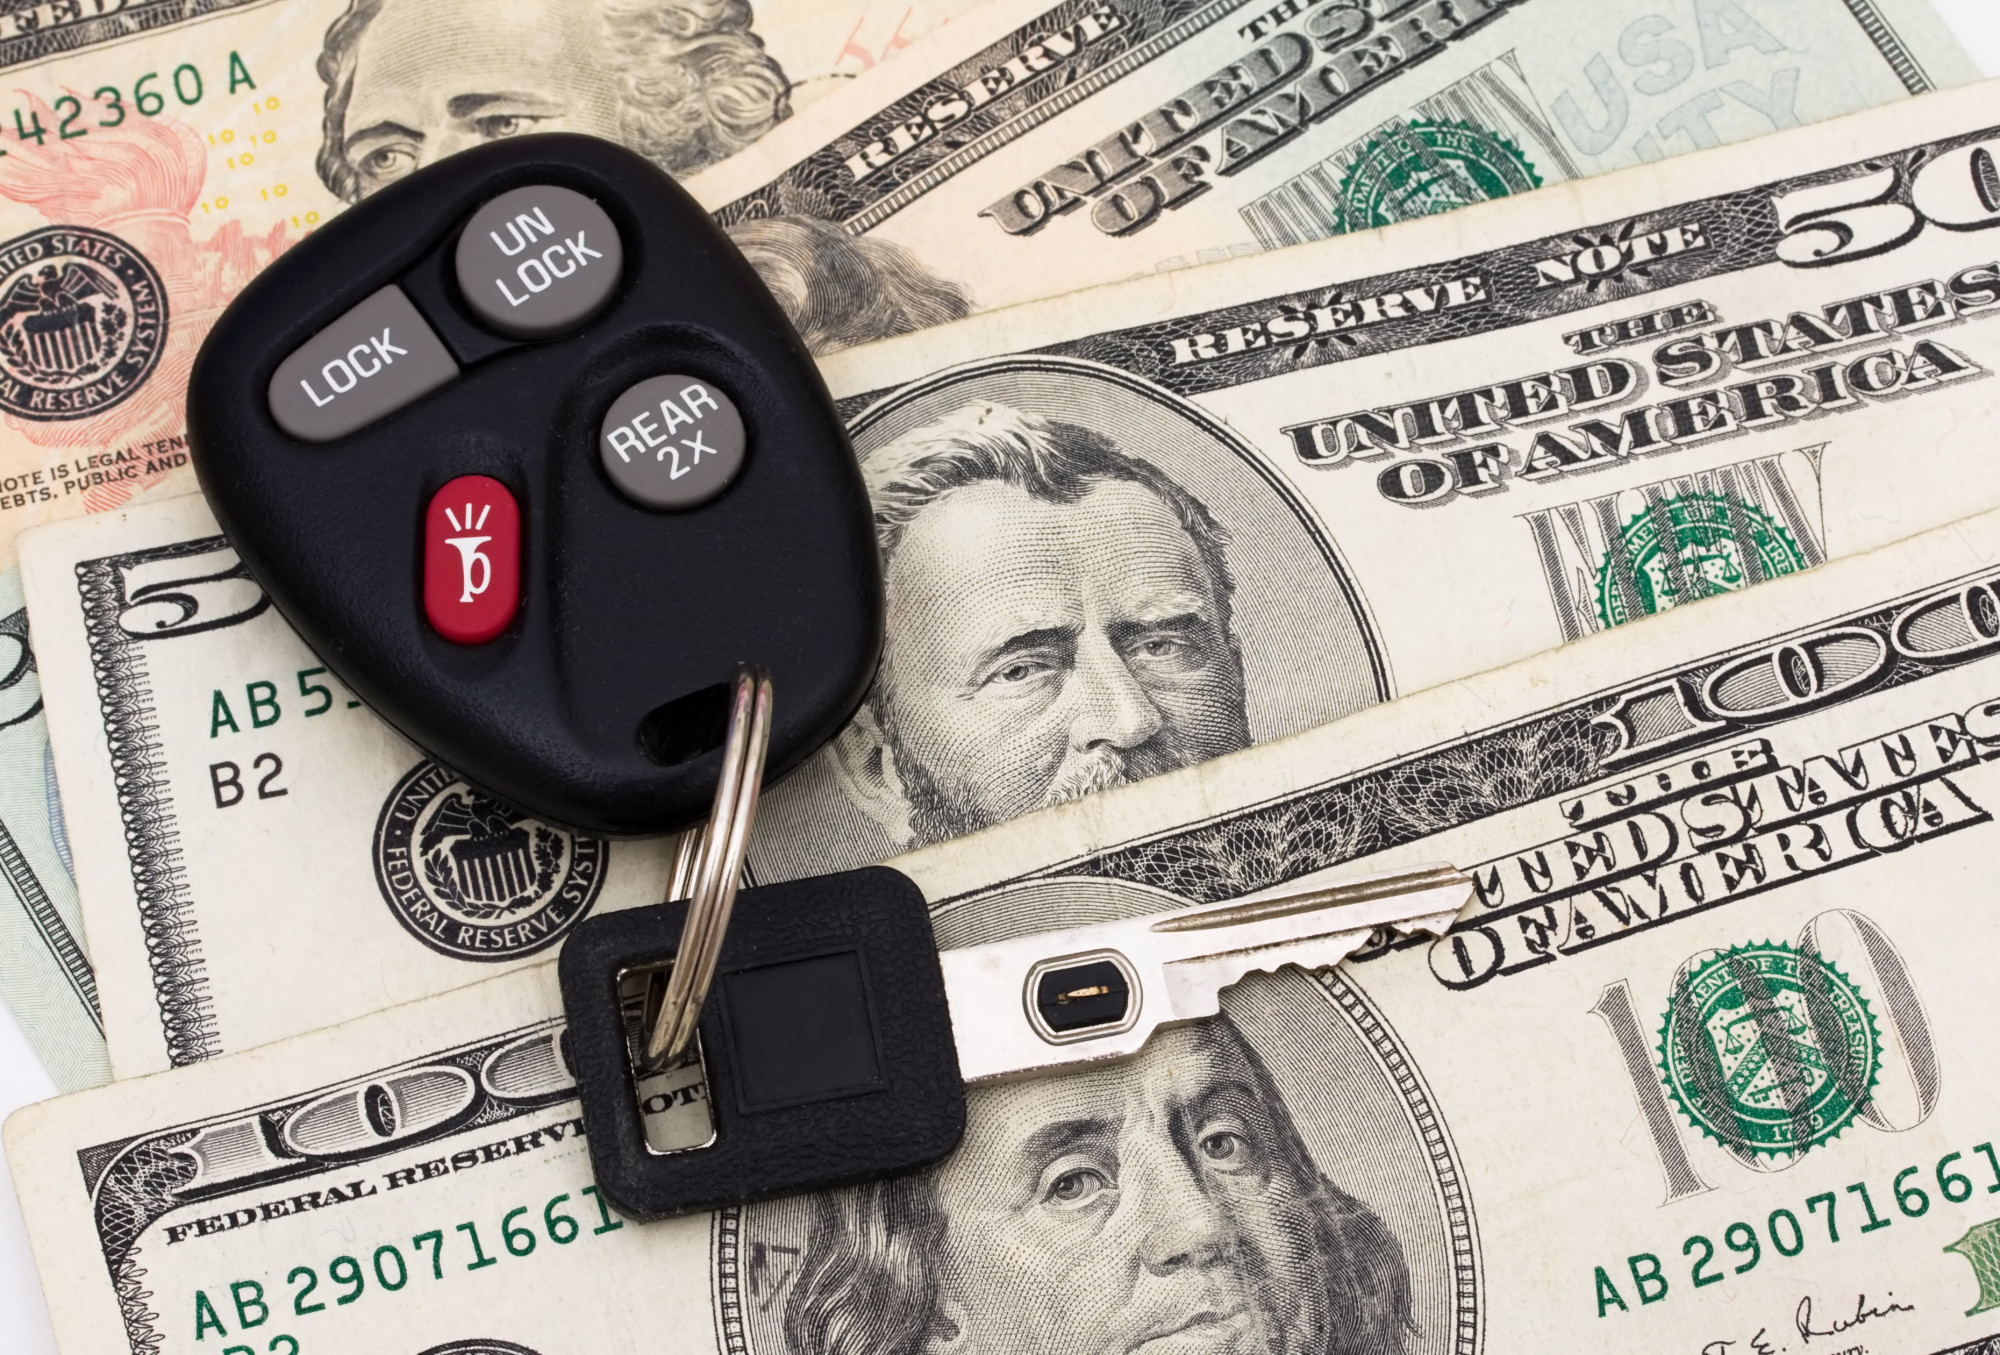 Finding the right loan to finance your car requires knowing who can offer it. This guide explains everything to know when selecting car loan providers.